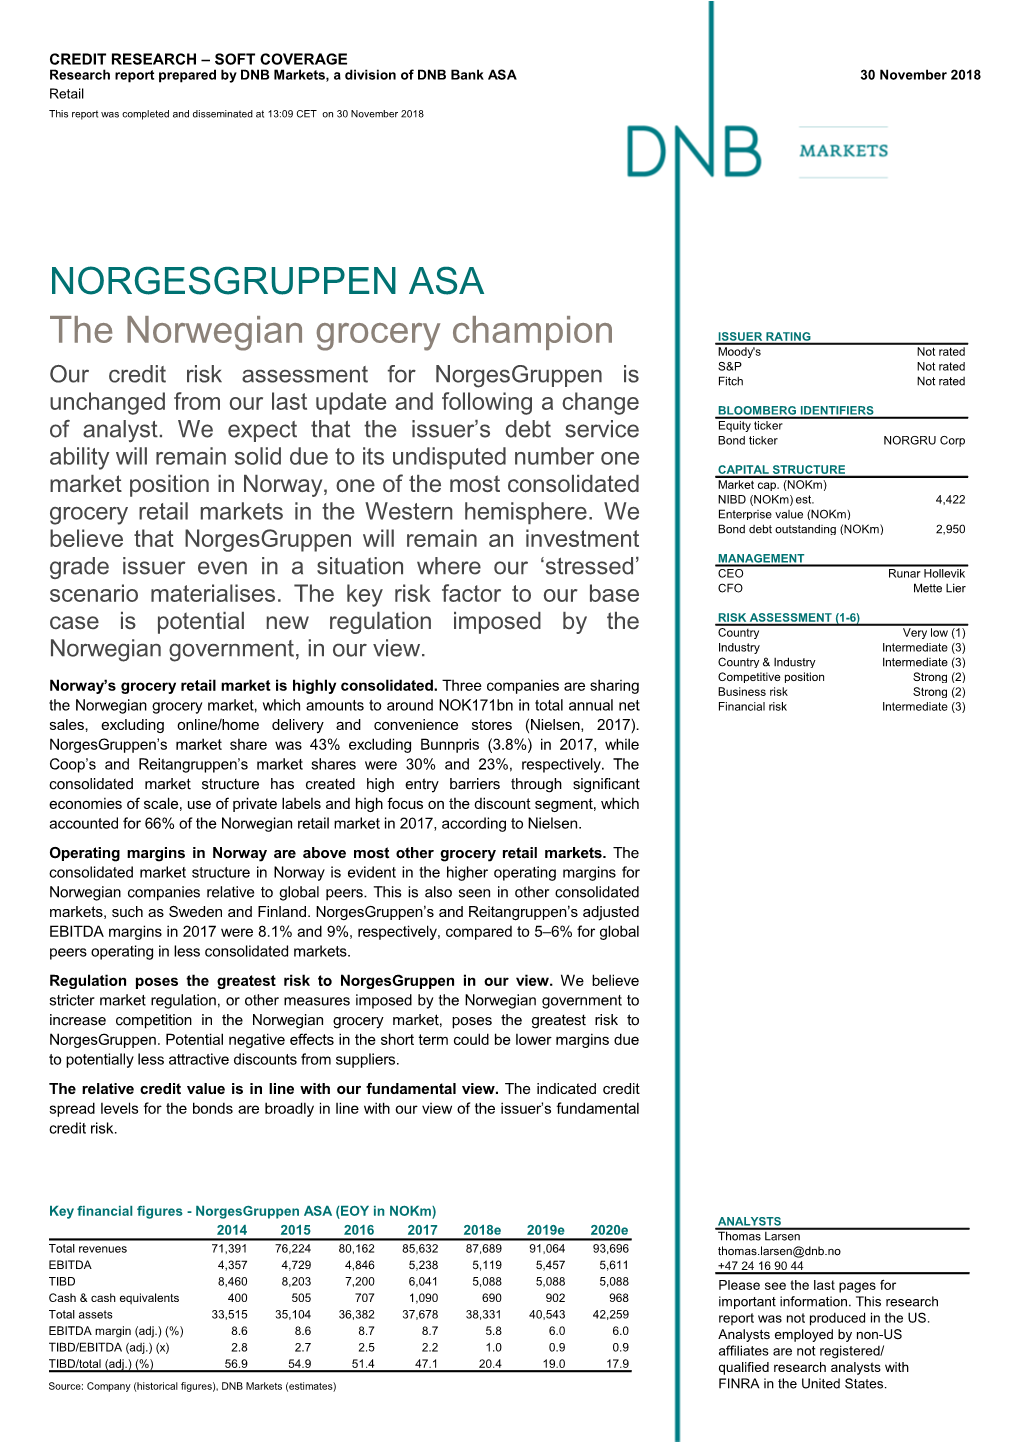 NORGESGRUPPEN ASA the Norwegian Grocery Champion